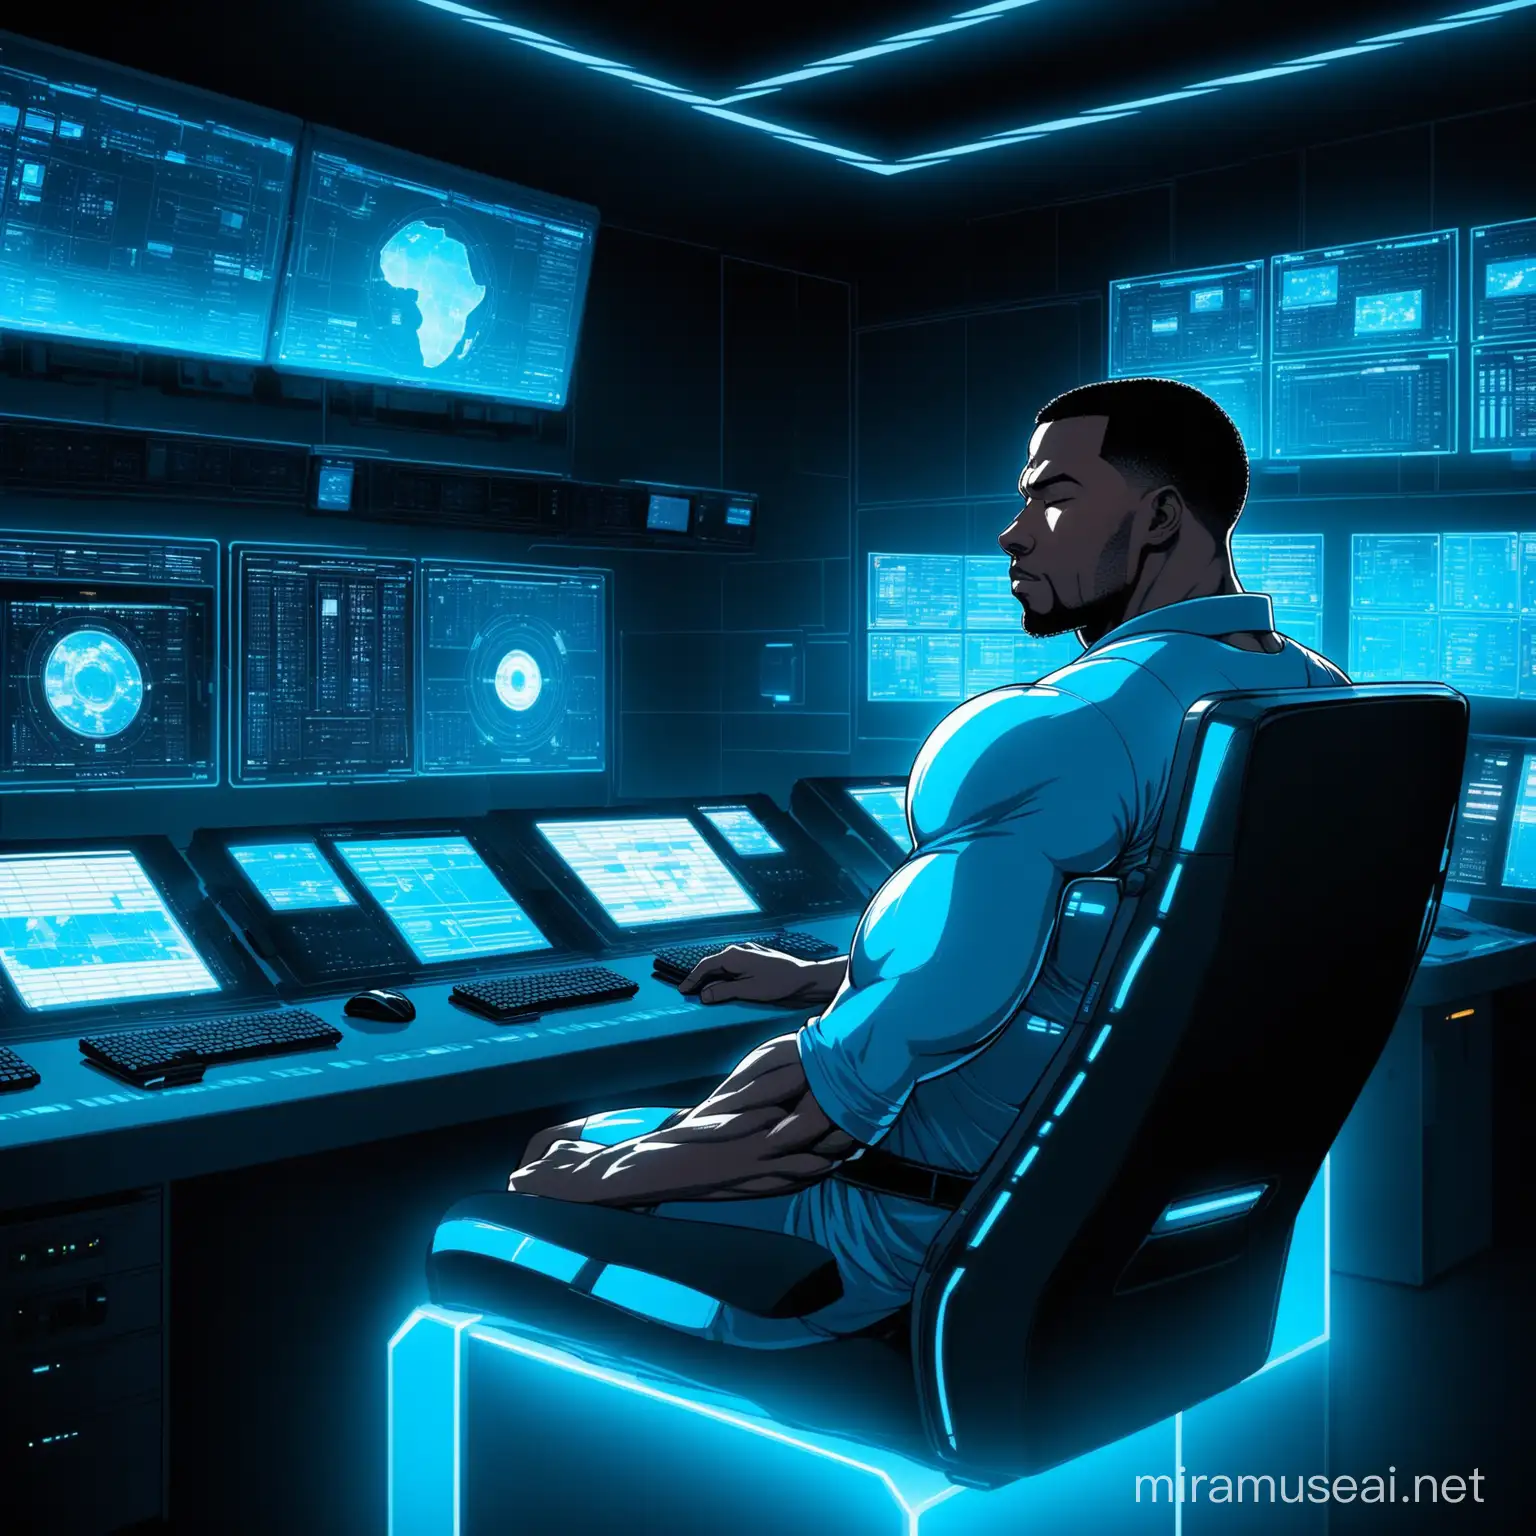 High Tech Control Room with Sleeping African American Man